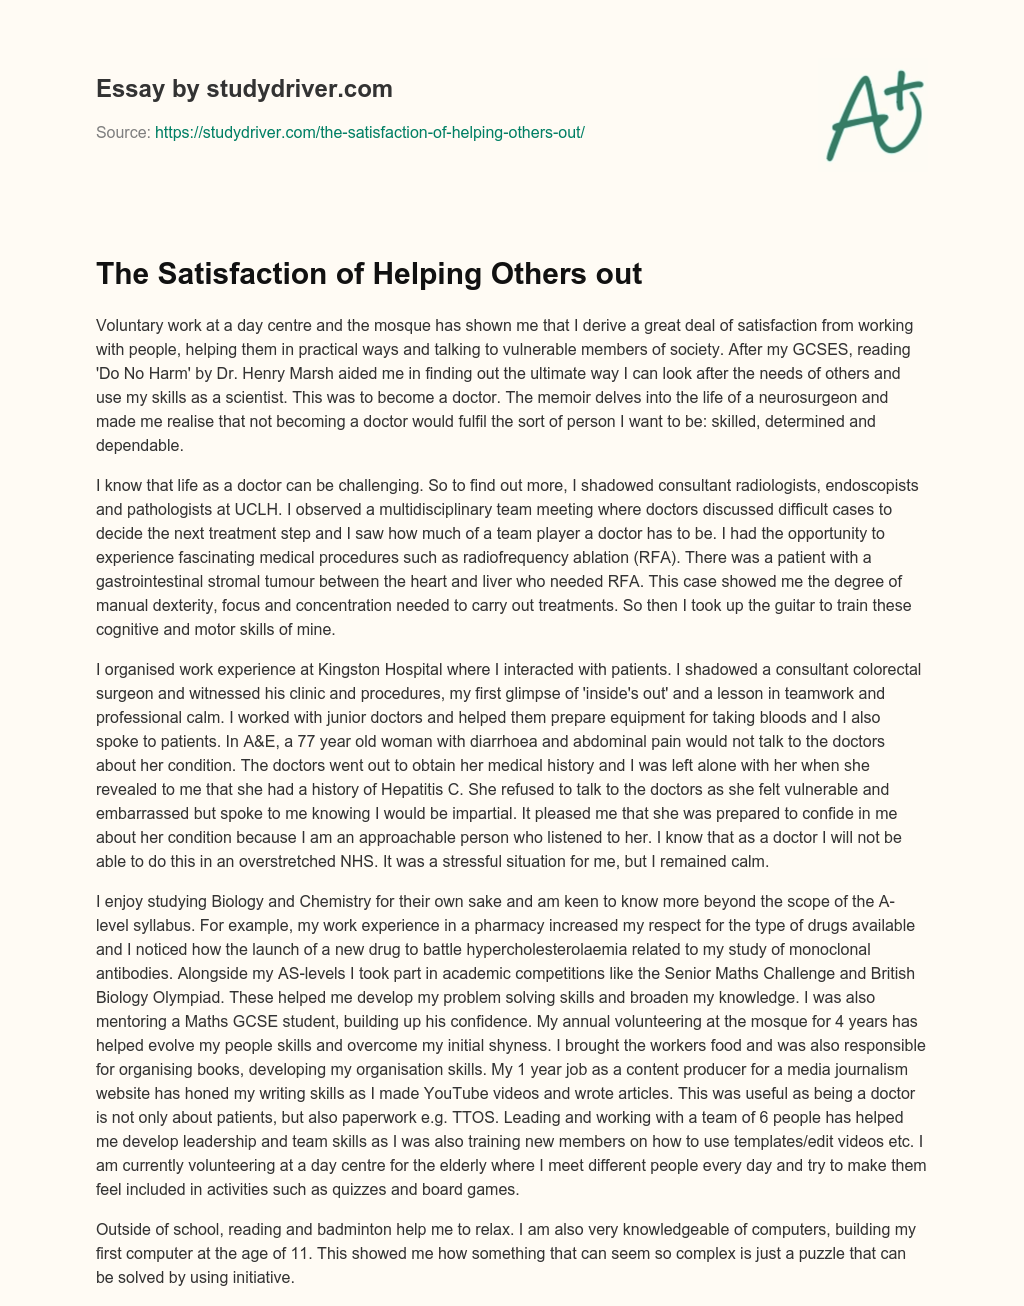 The Satisfaction of Helping Others out essay